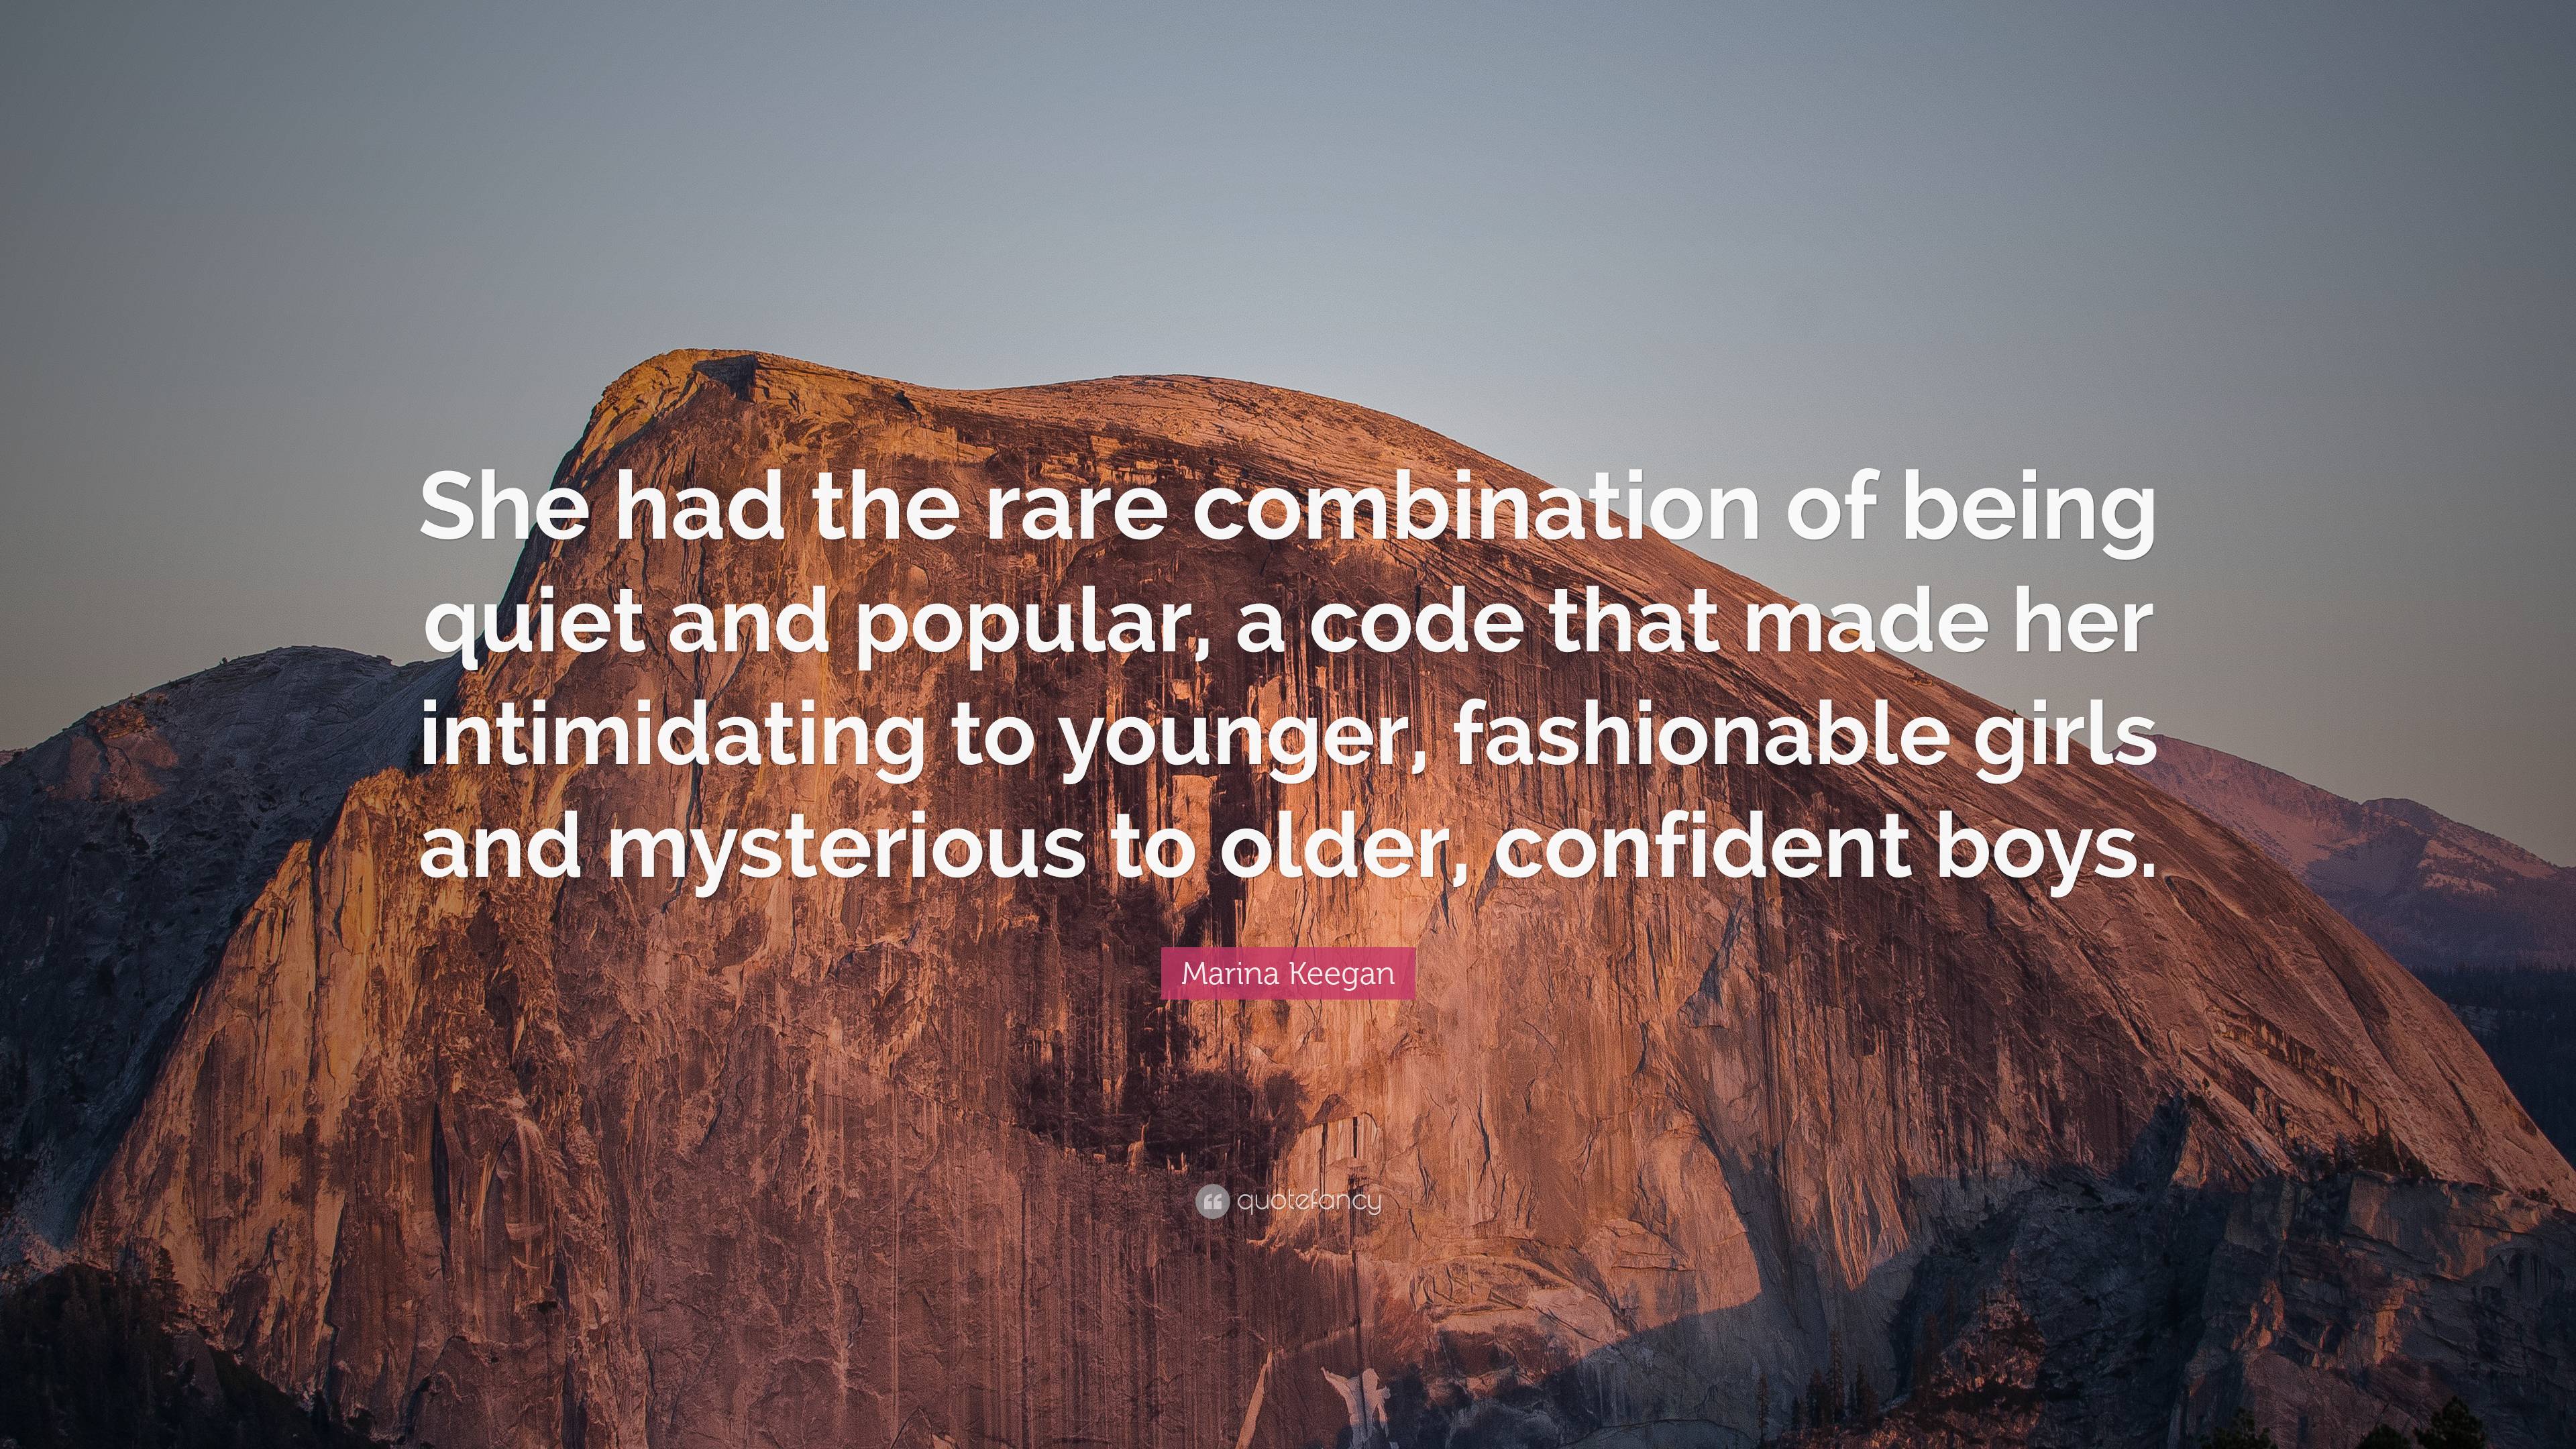 Marina Keegan Quote: “She had the rare combination of being quiet and ...